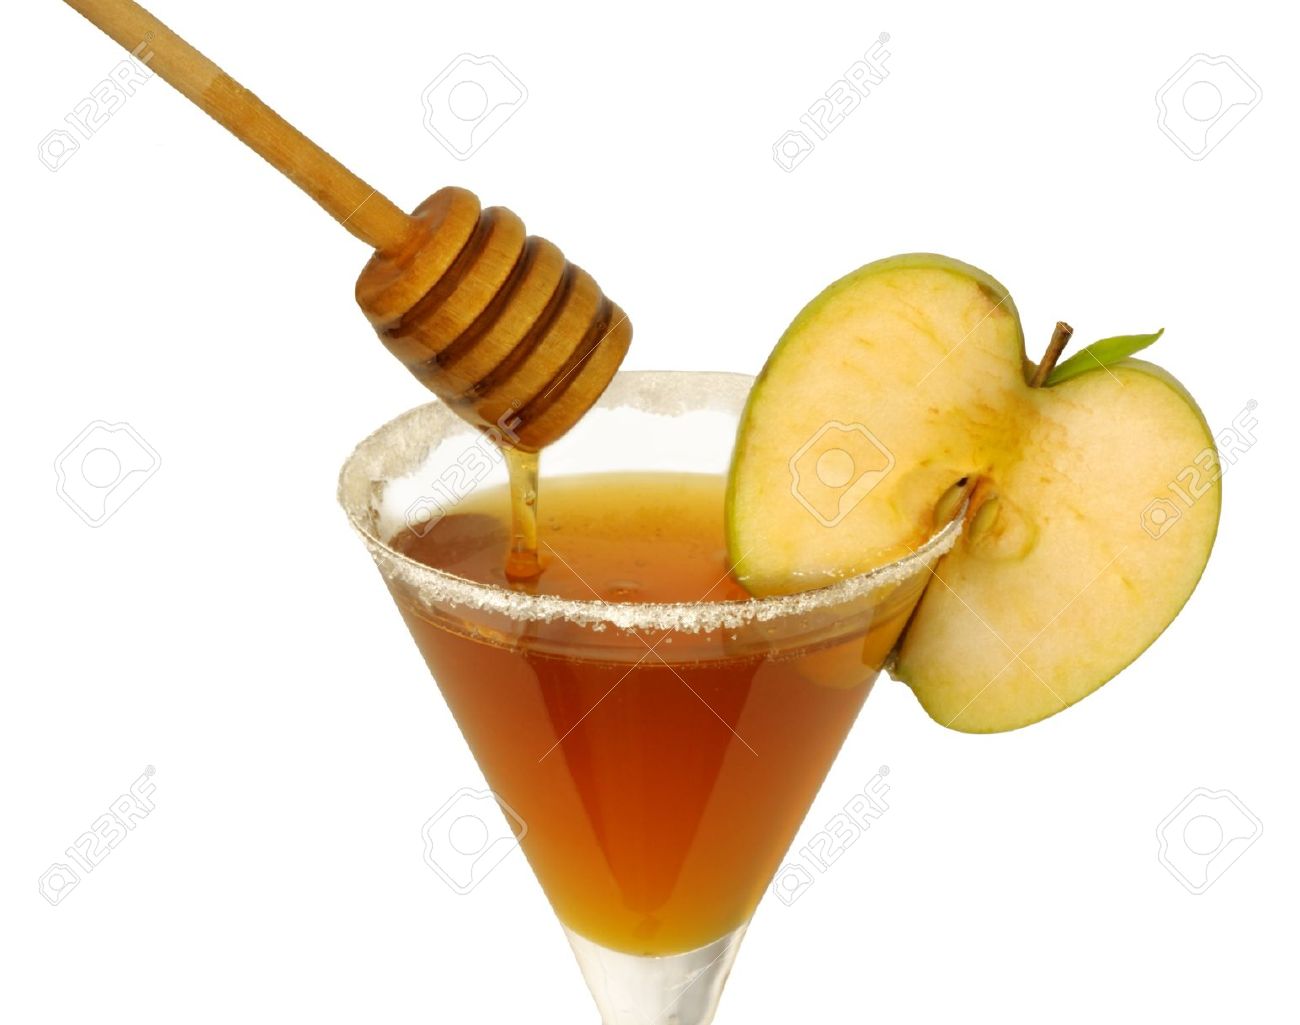 Apples And Honey PNG - 158782